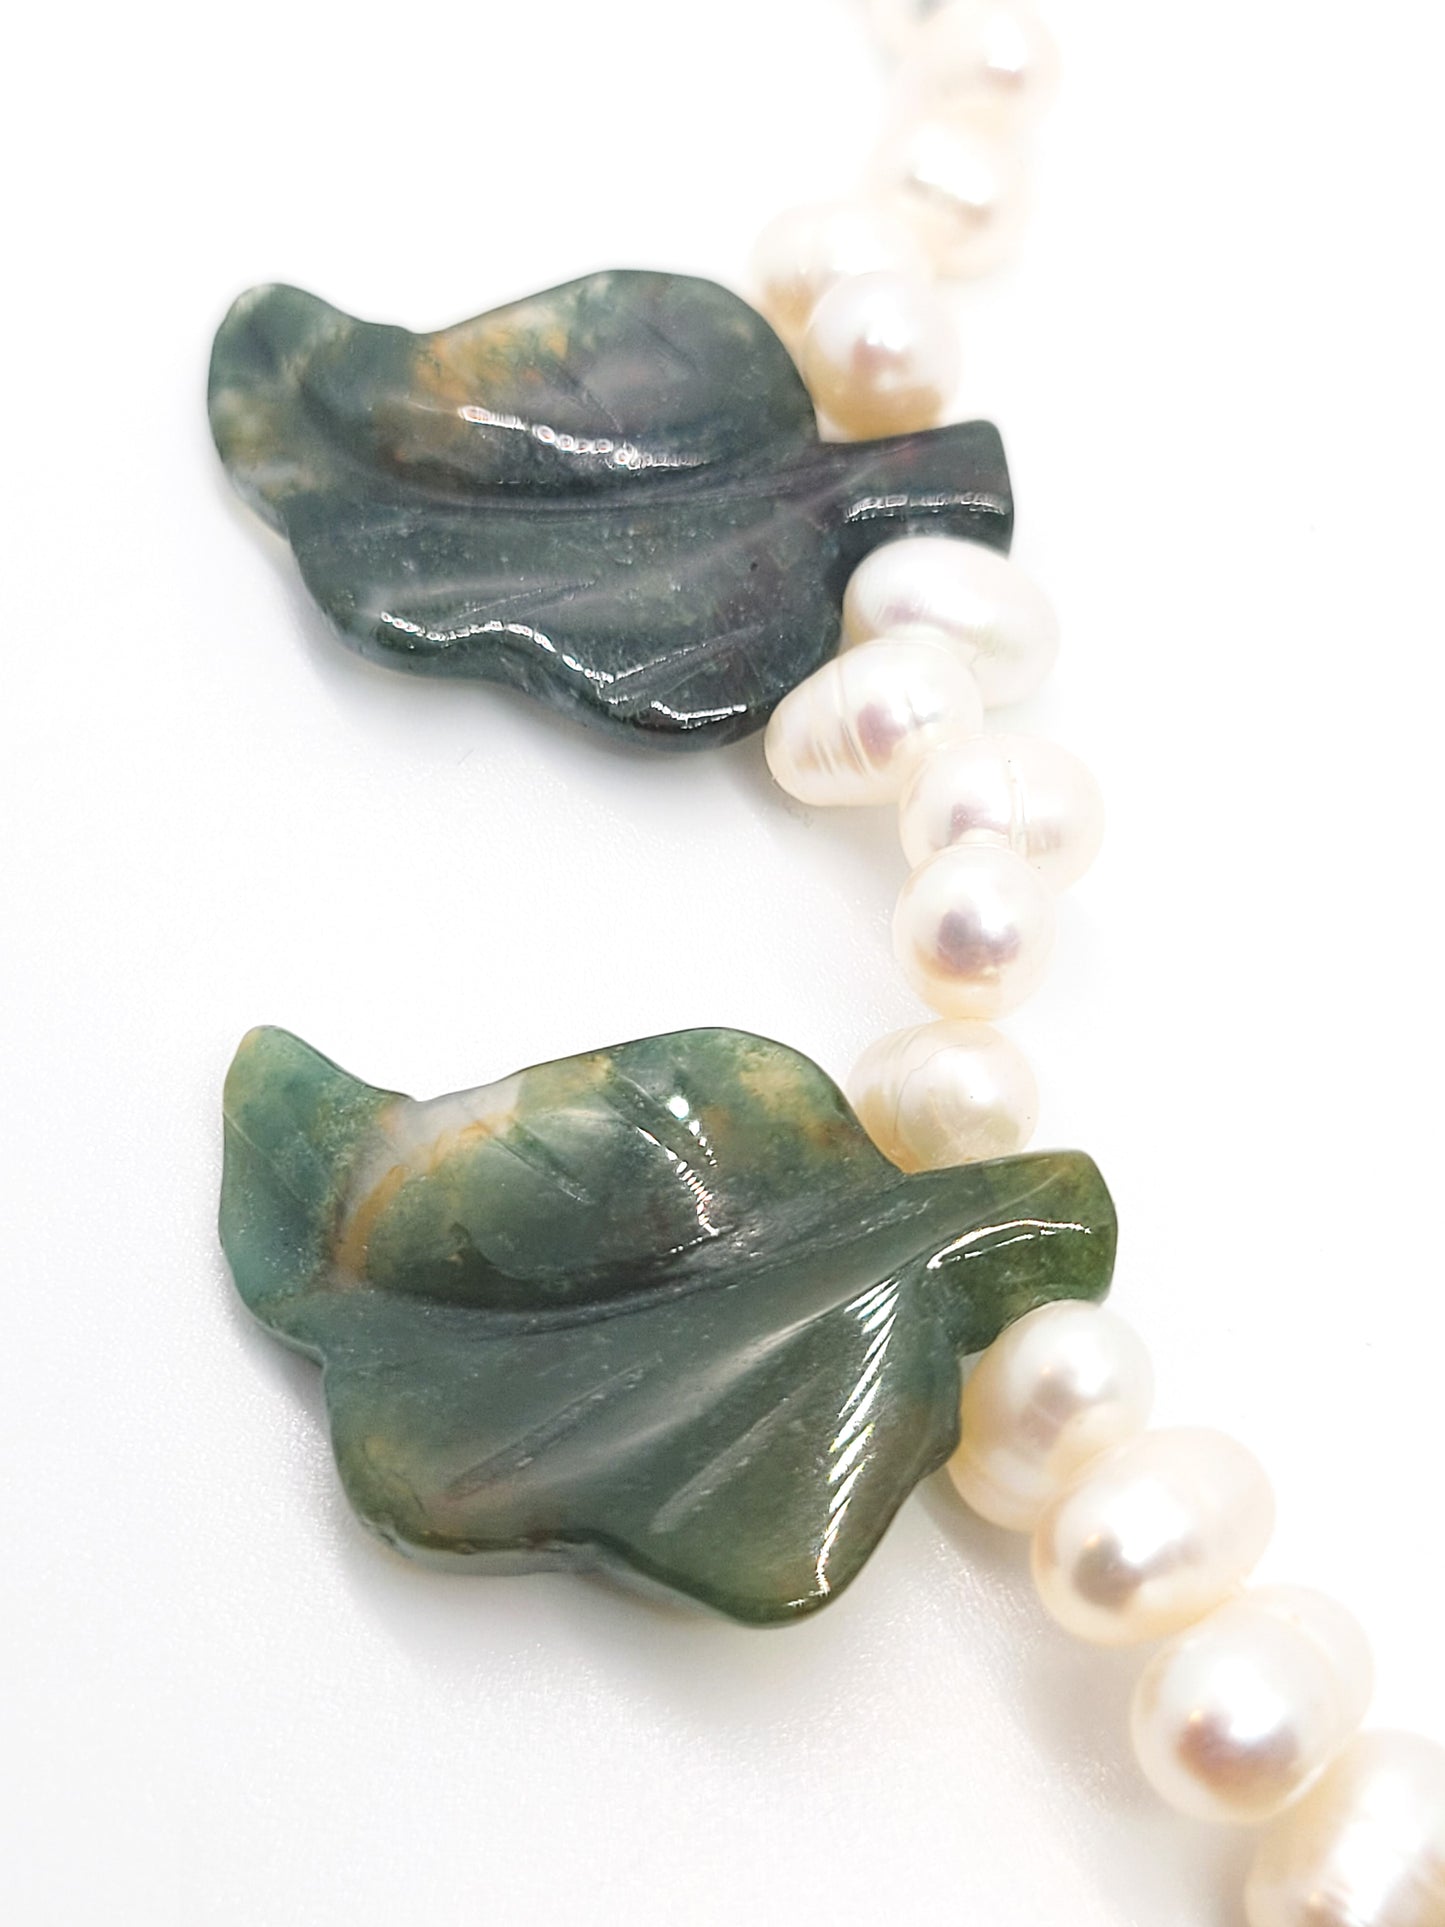 Freshwater pearl and carved Moss Agate artisan gemstone necklace